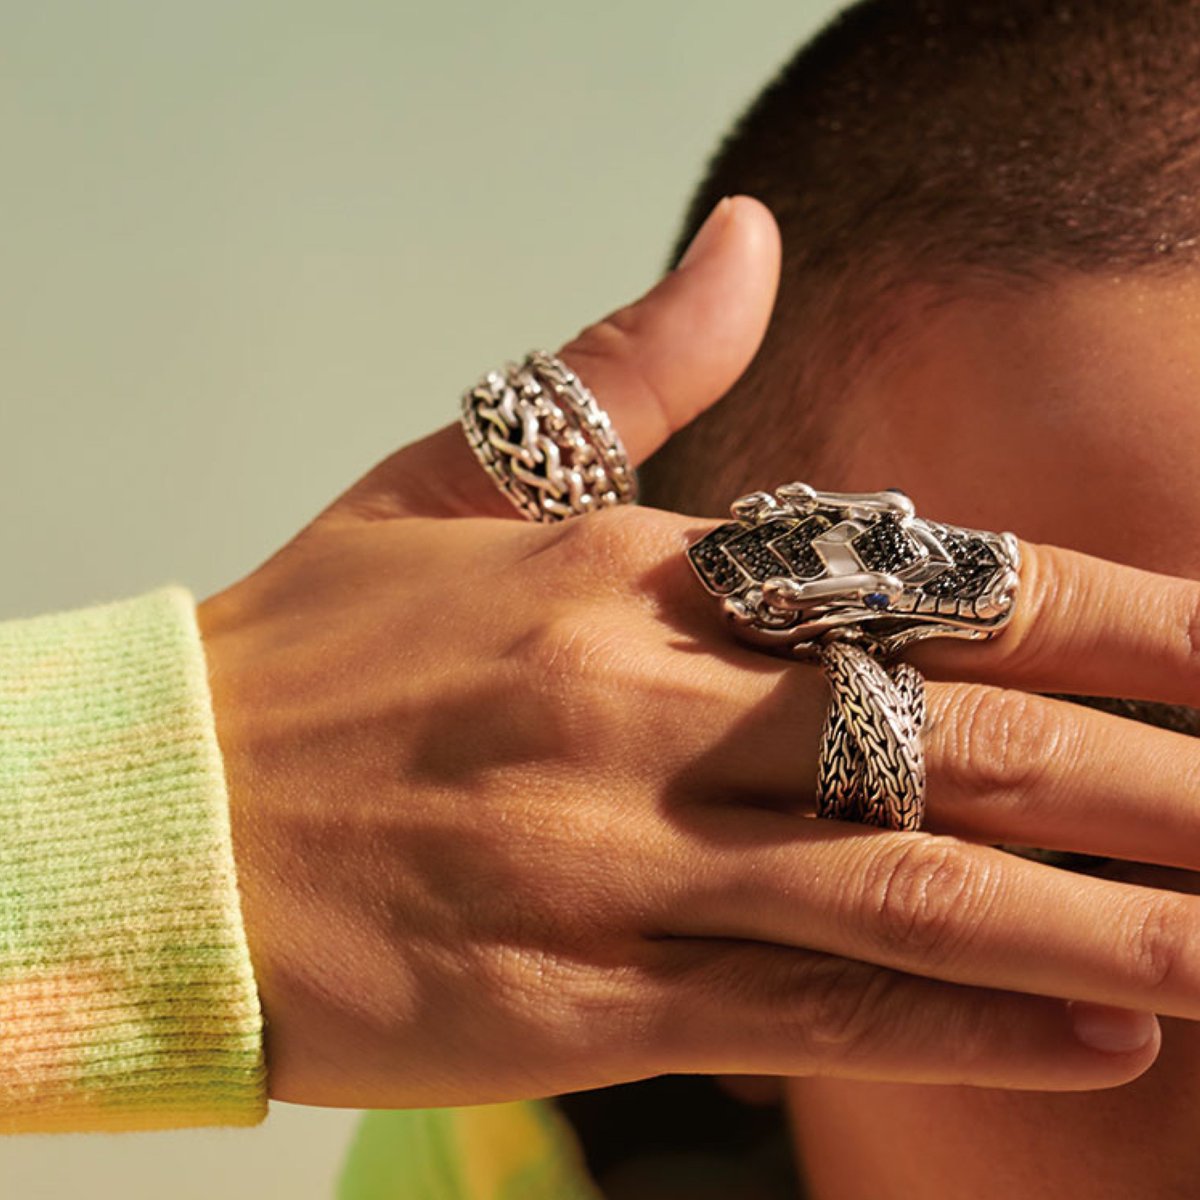 Let your hands do the talking. Shop bold statement bands and figurative rings: bit.ly/3pBZfOW #ClassicChain #womensrings #mensrings #LegendsNaga